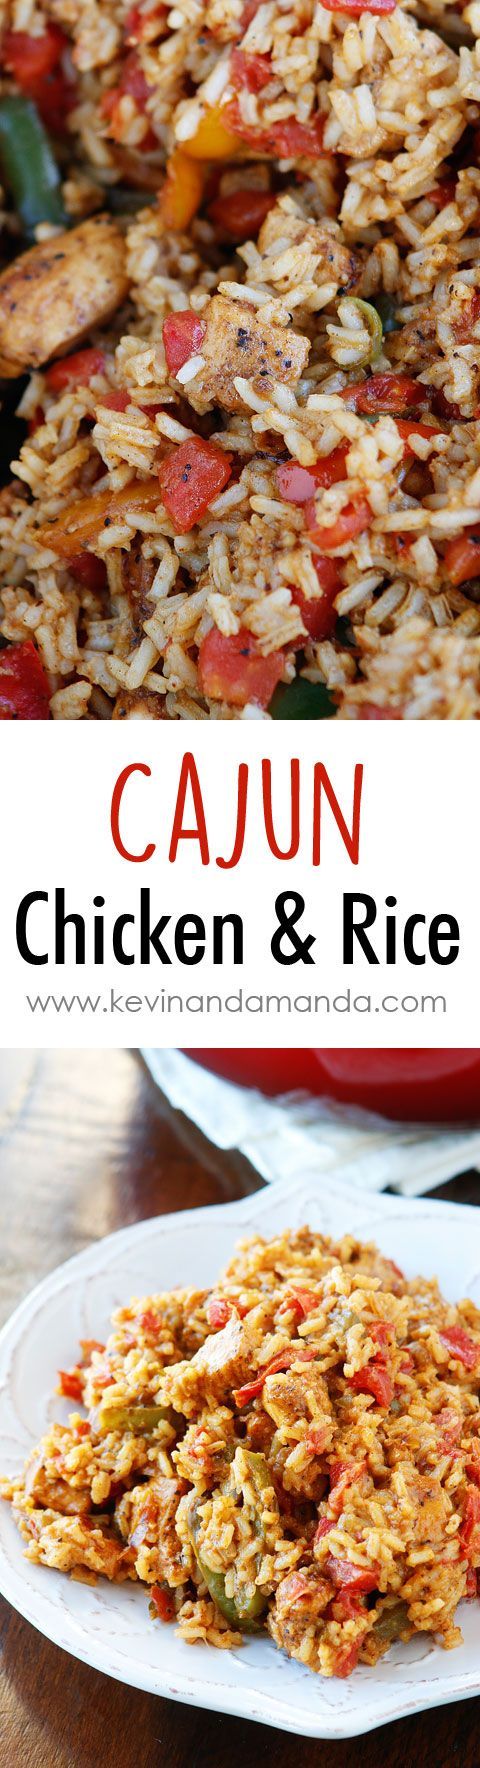 Cajun Chicken & Rice… I used all fresh veggies, chicken broth, a little  Worcestershire sauce and Tabasco  Thank you for